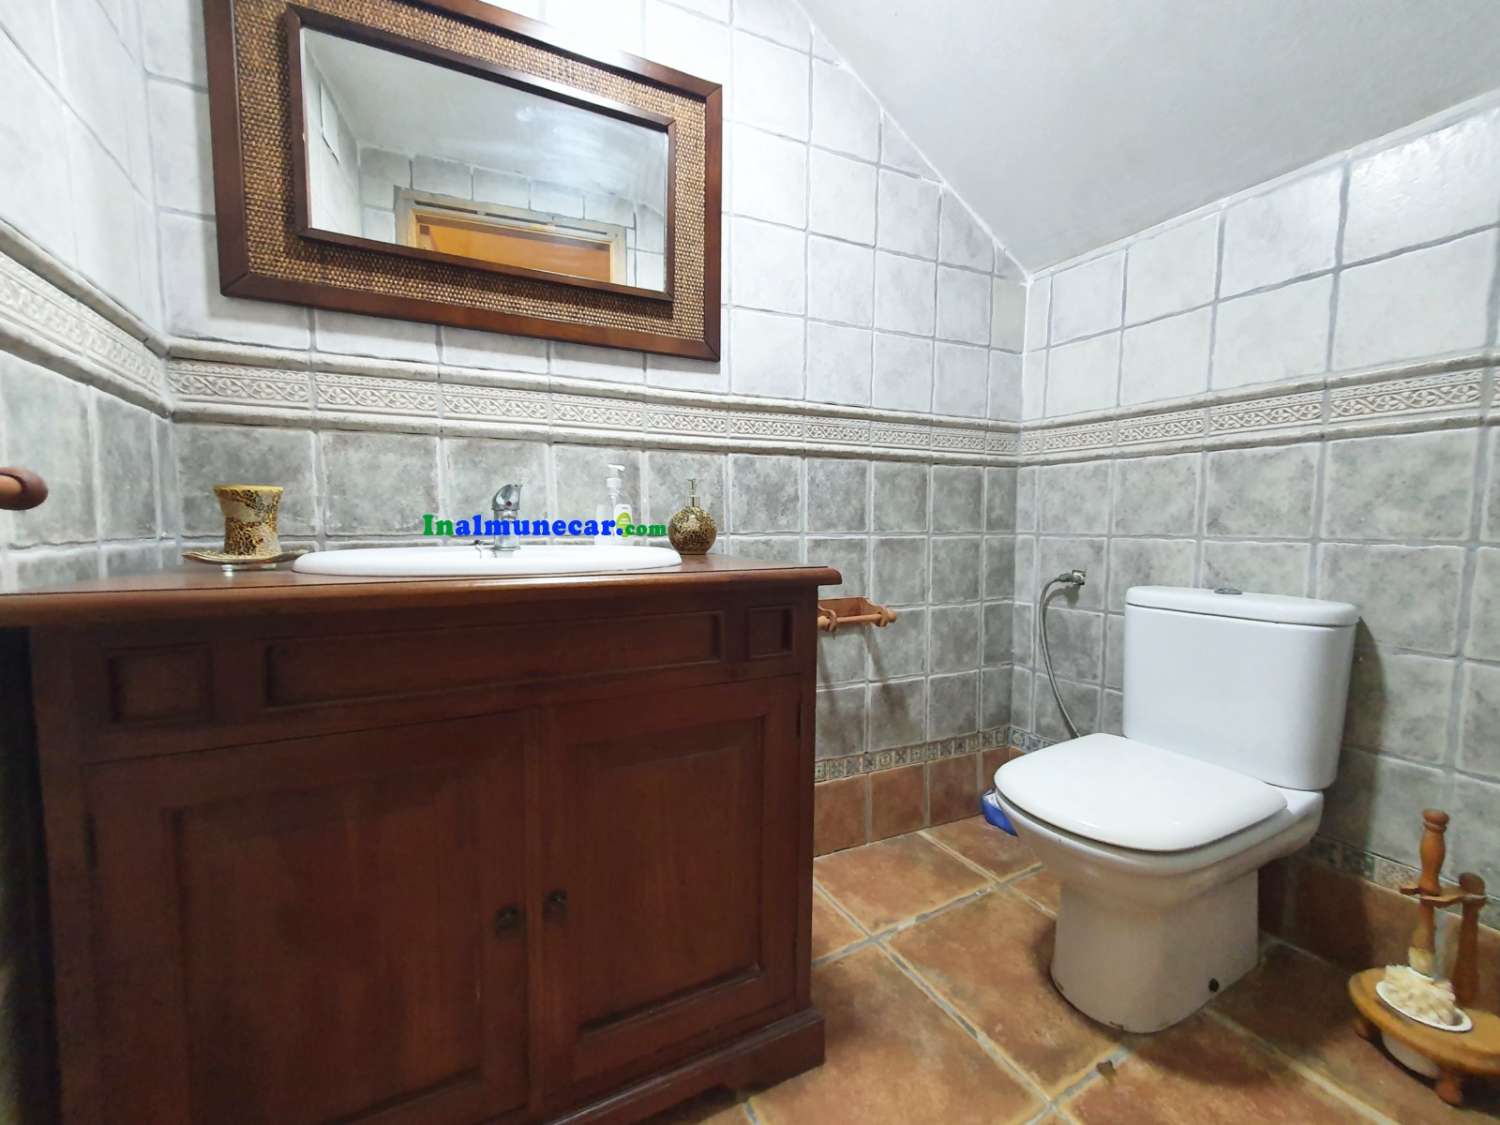 Fantastic house for sale in the centre, a stone´s throw from the Town Hall Square.